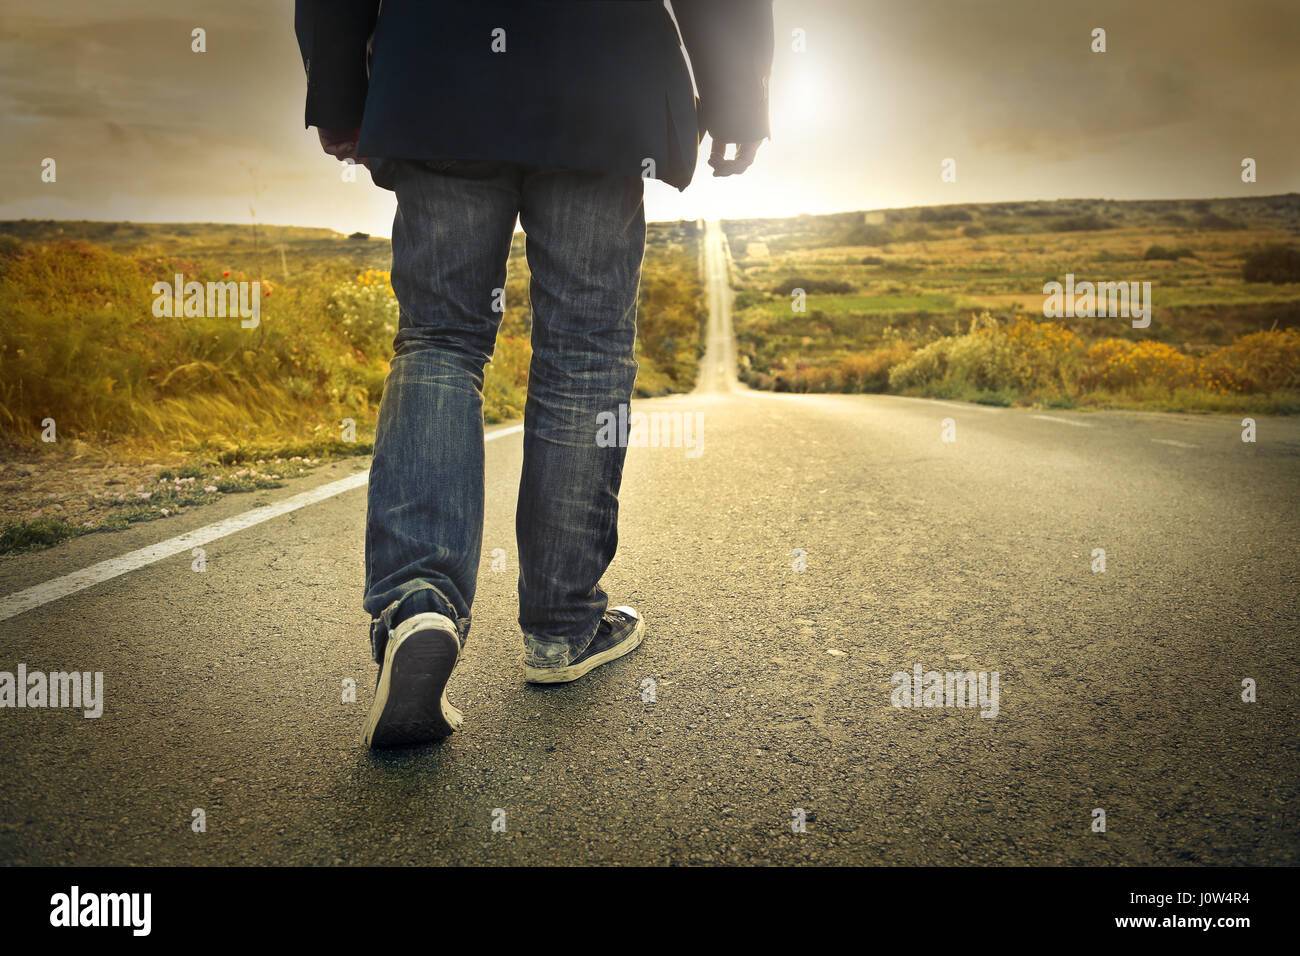 Lonely man walking on road Stock Photo